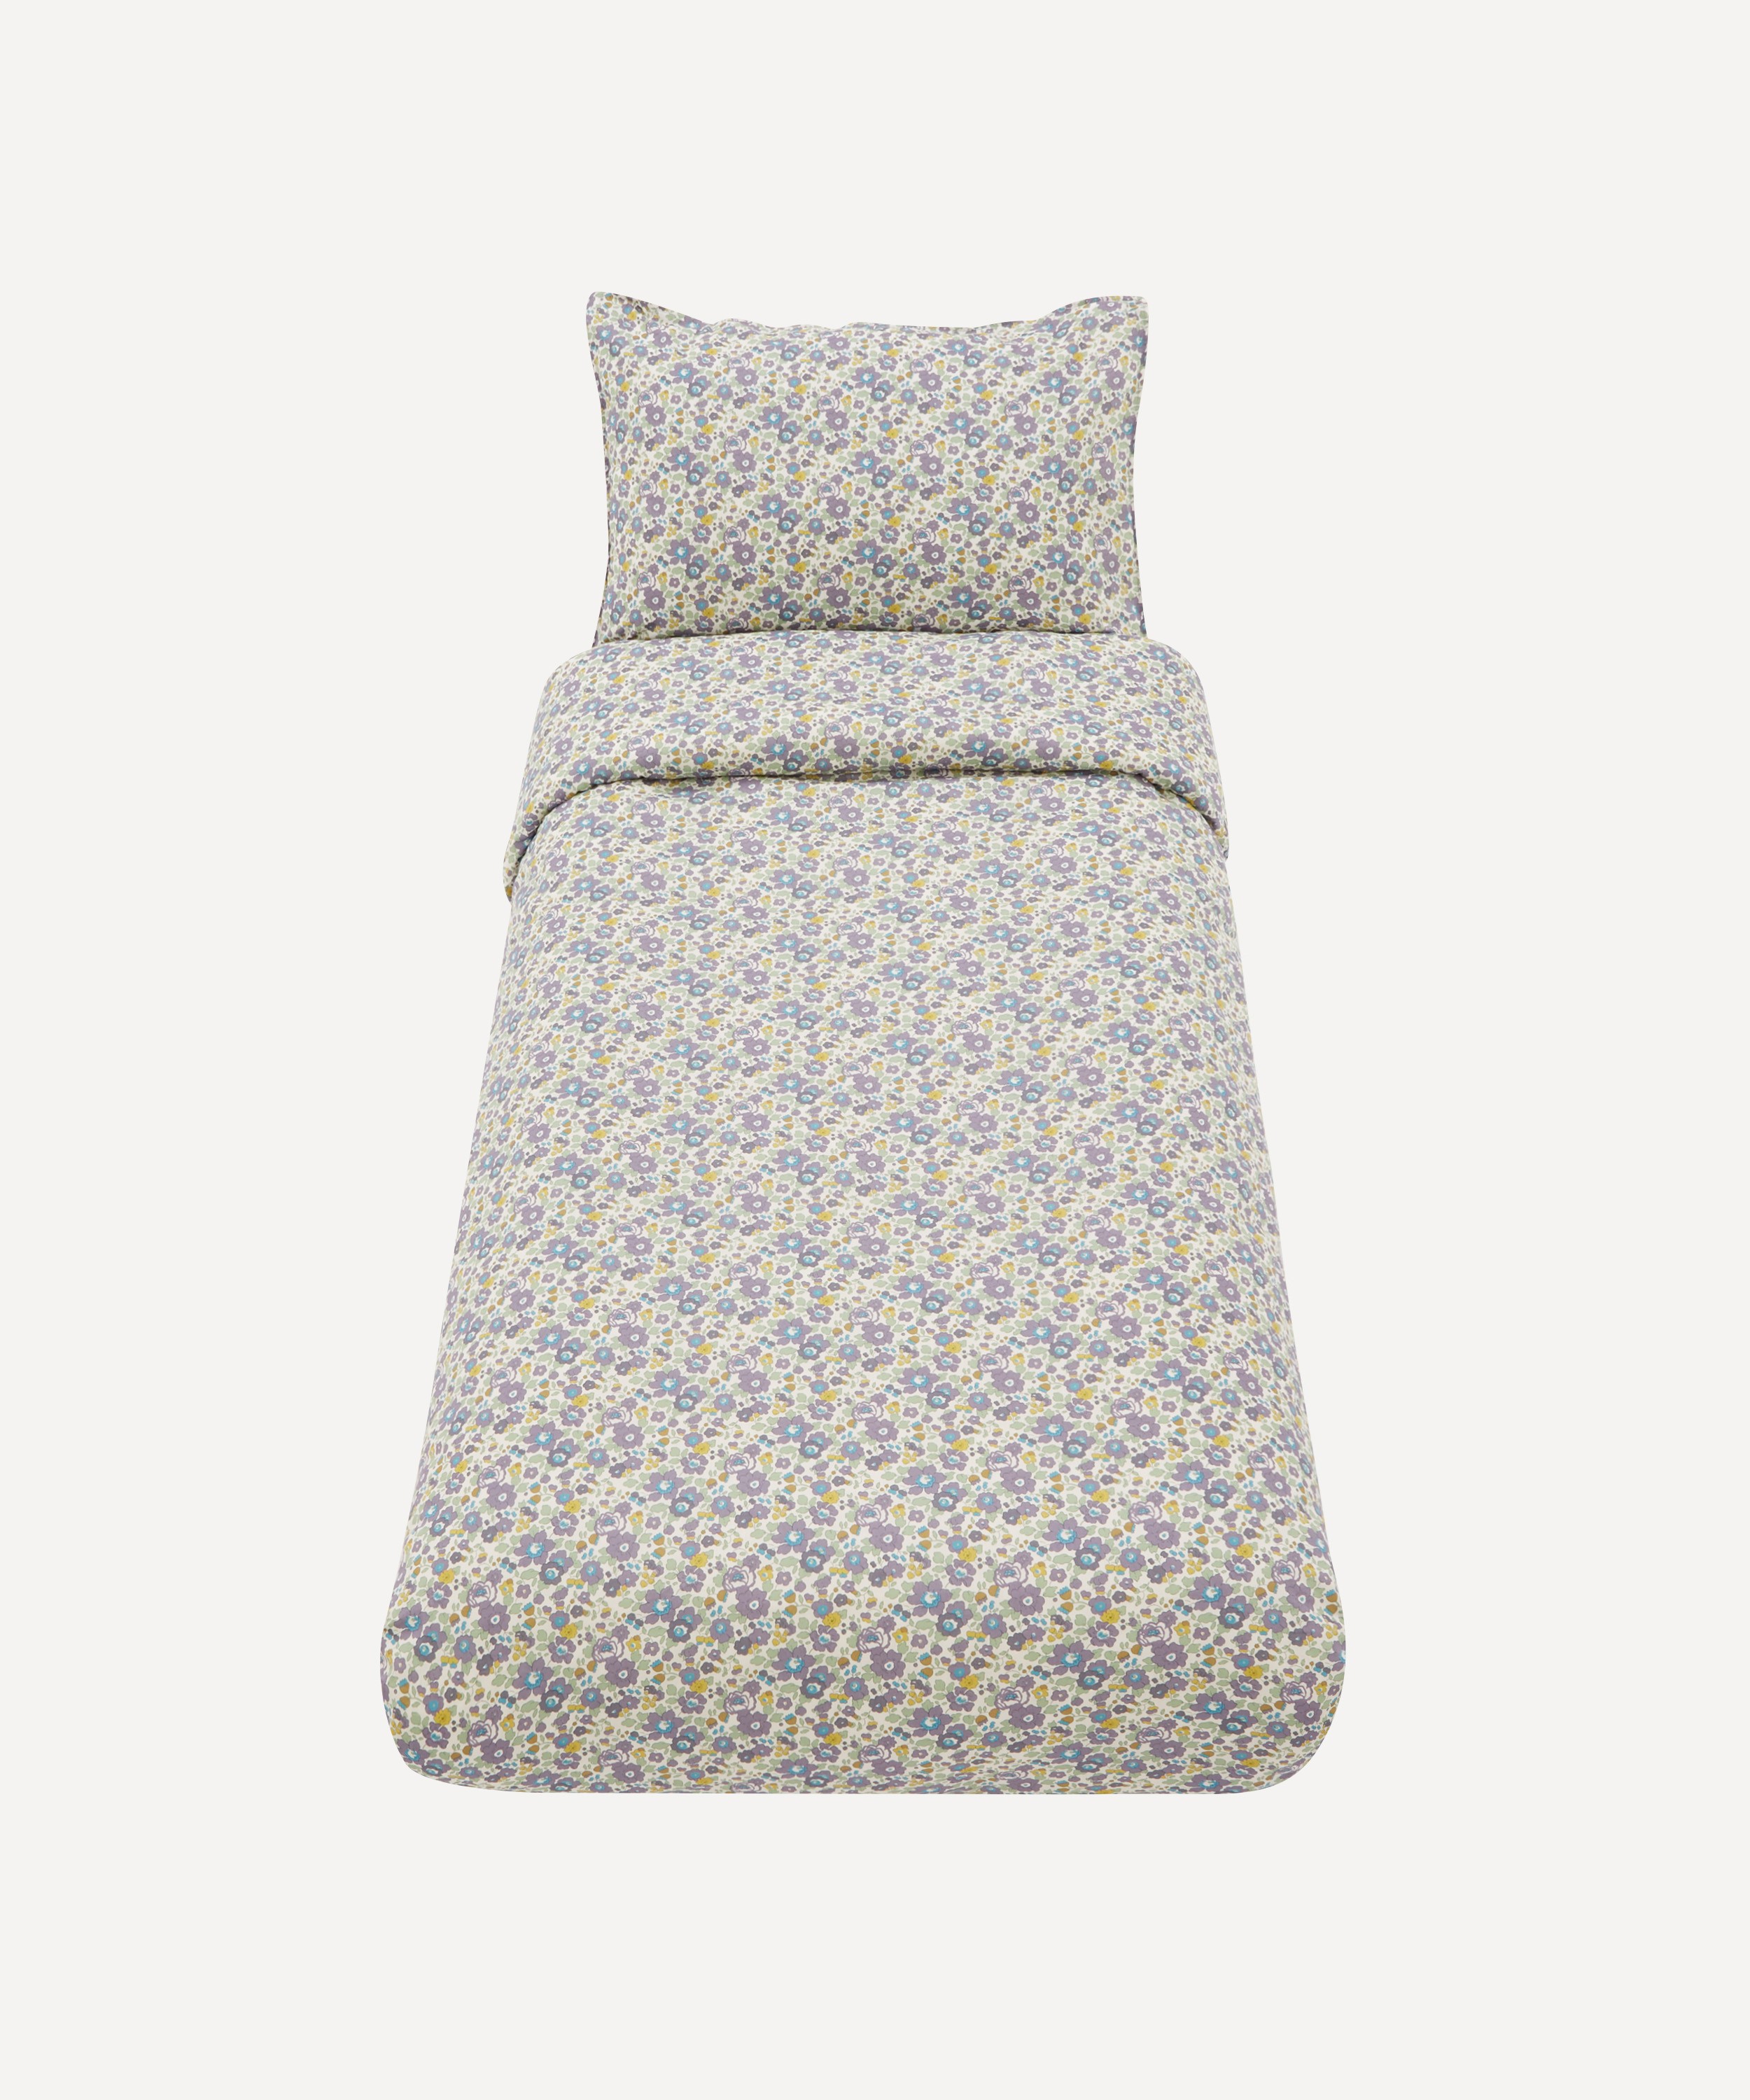 Coco & Wolf - Betsy Organic Cotton Single Duvet Cover Set image number null